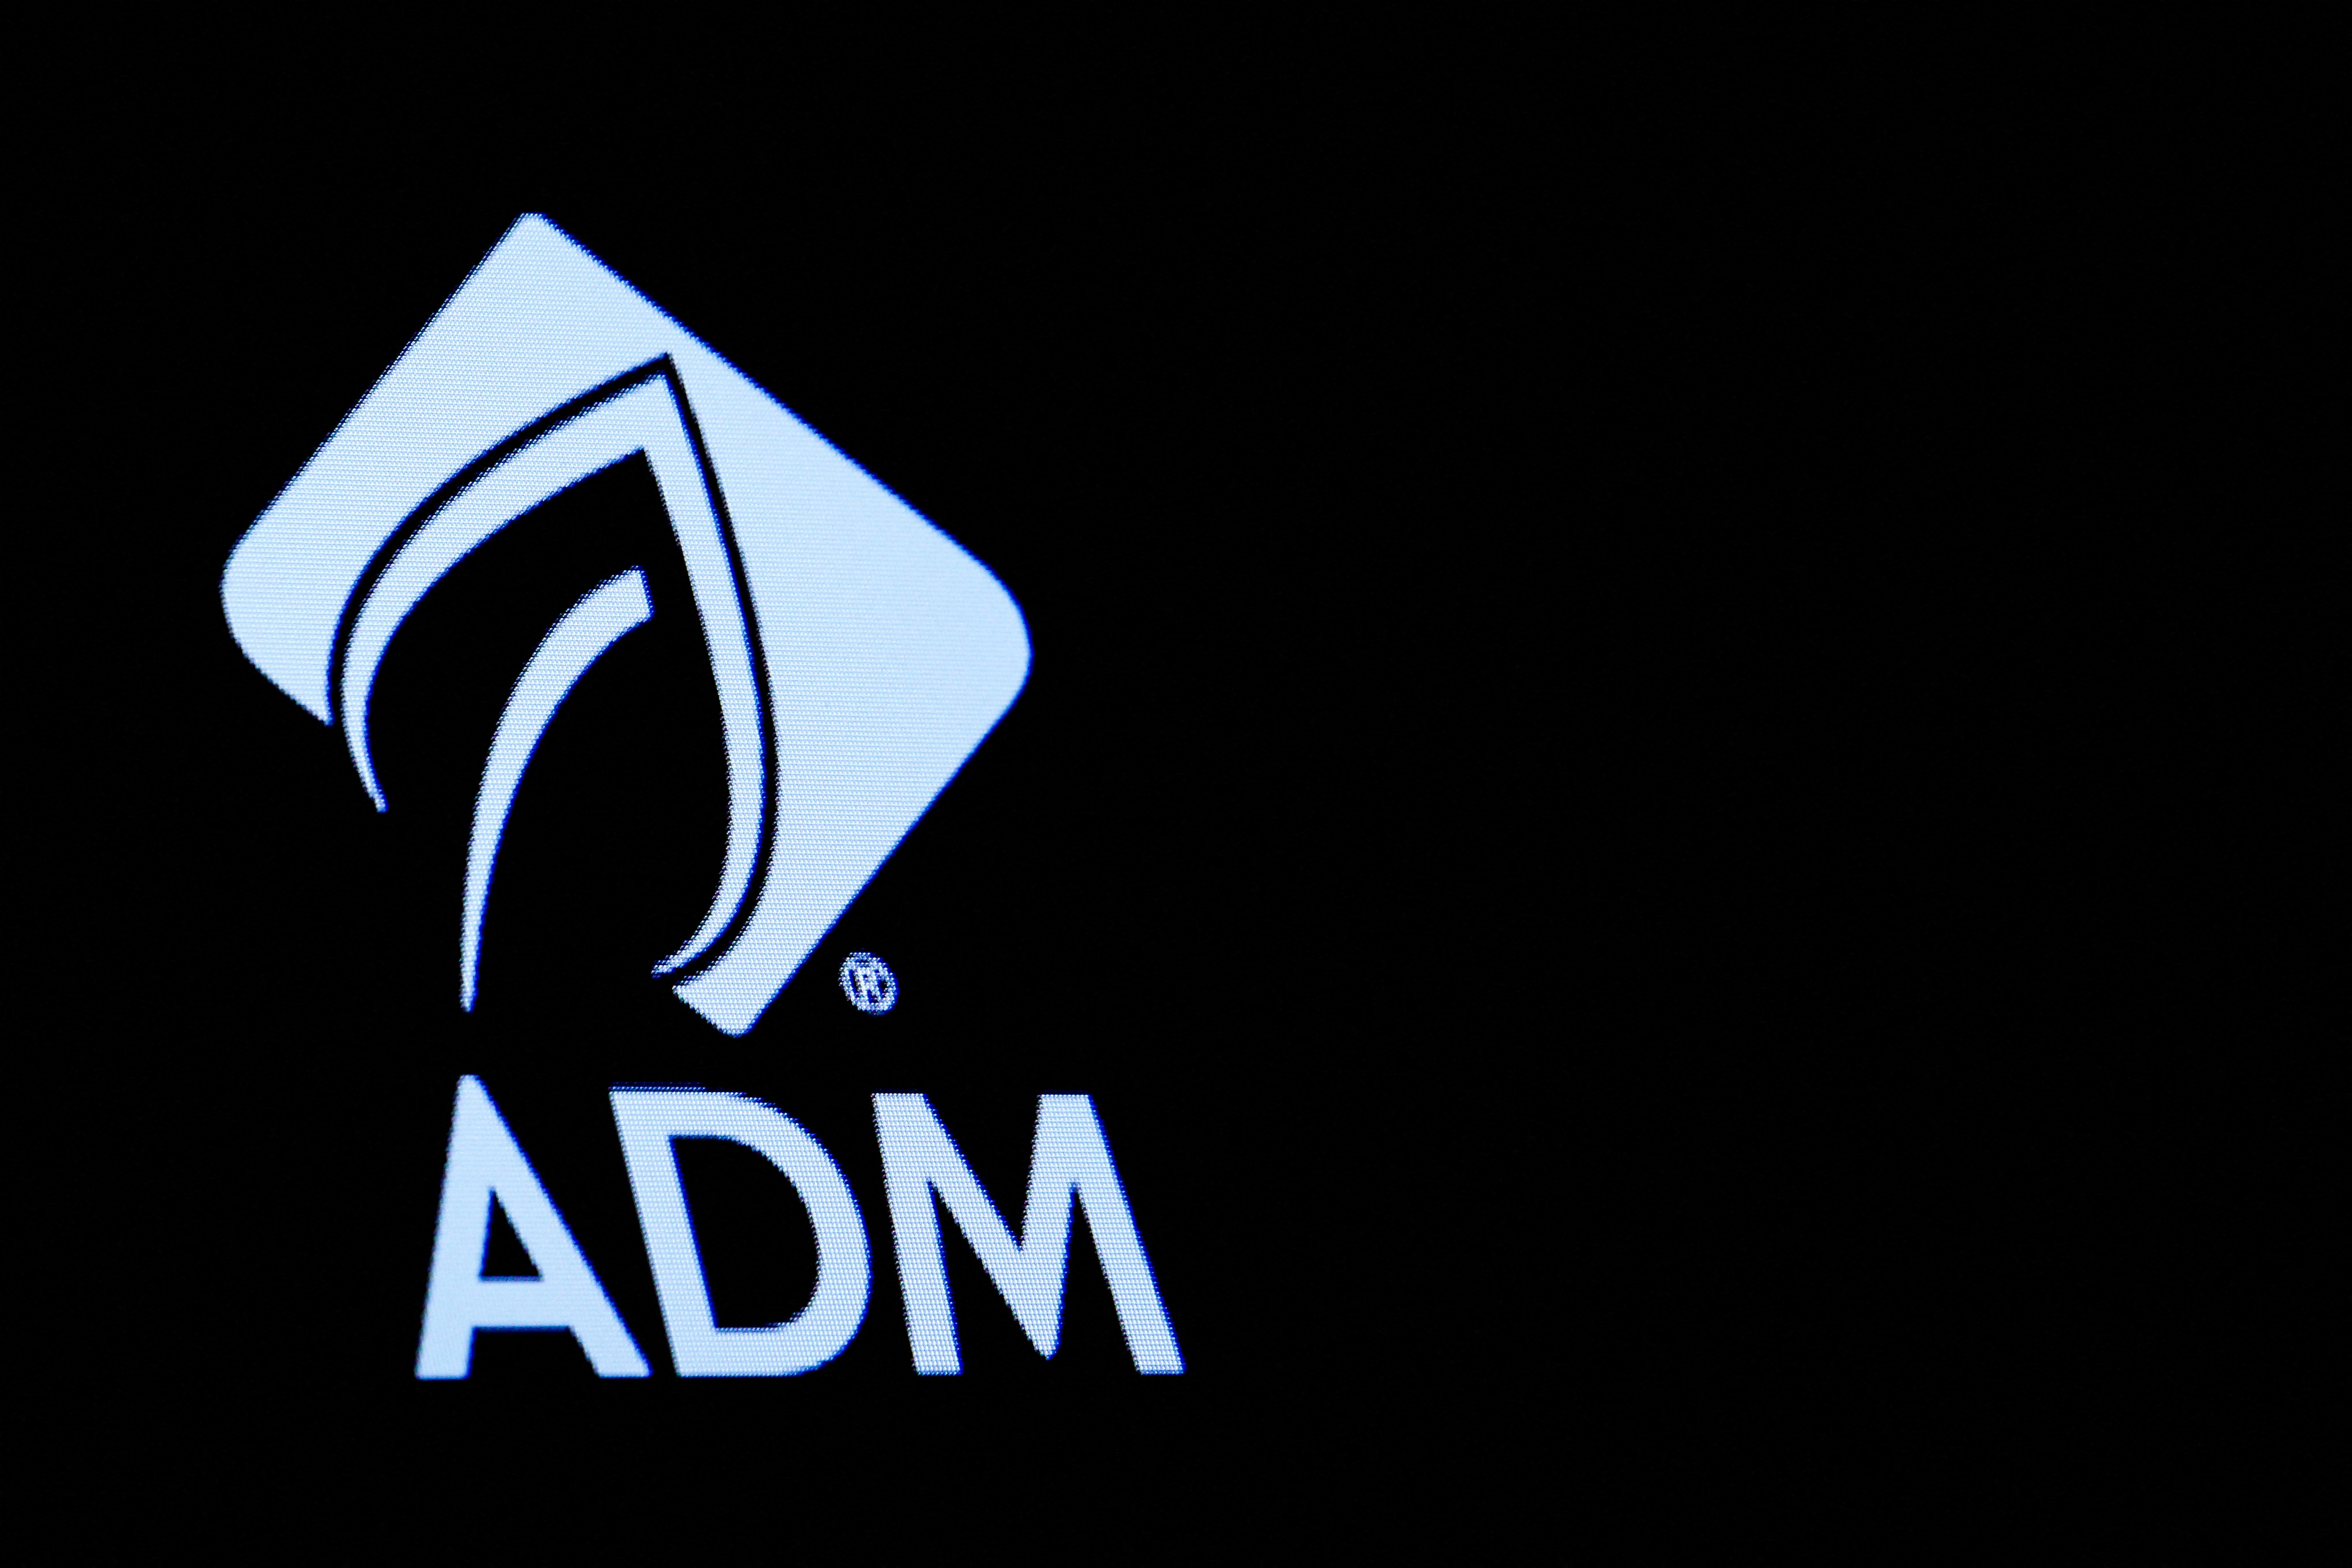 The Archer Daniels Midland Co. (ADM) logo is displayed on a screen on the floor of the NYSE in New York